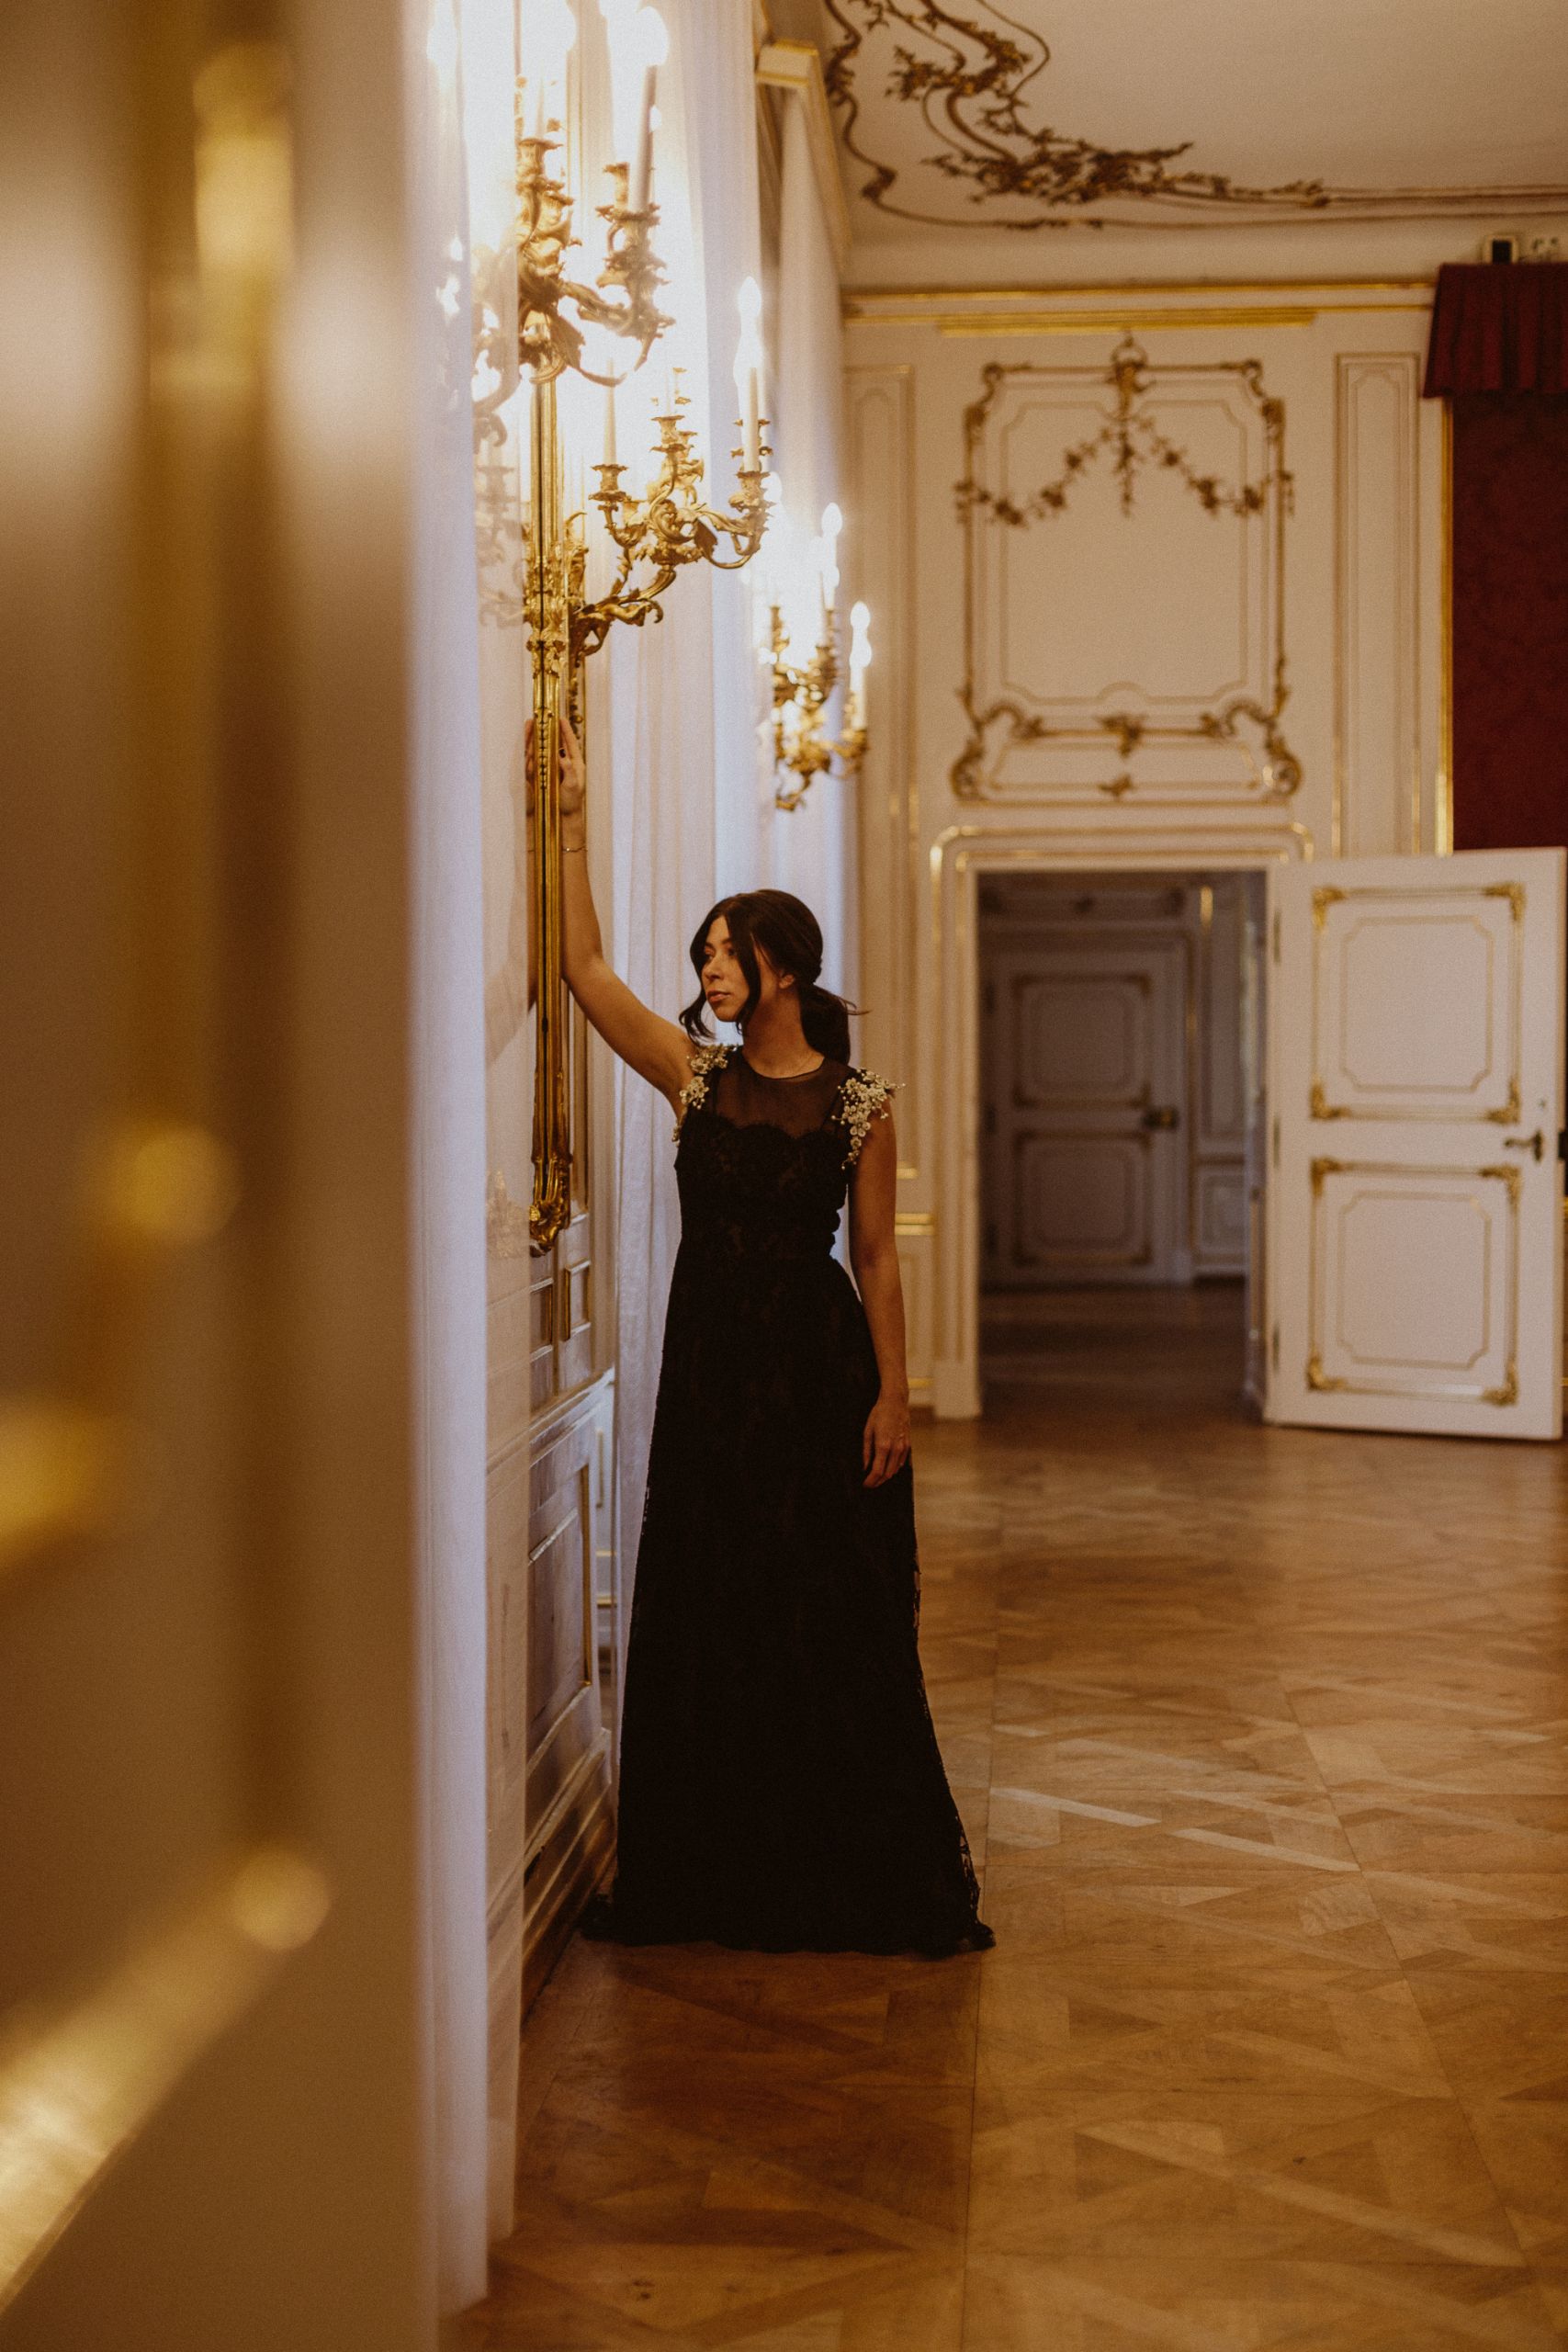 Silvester in Wien: 50. Silvesterball Hofburg Vienna - Love Daily Dose